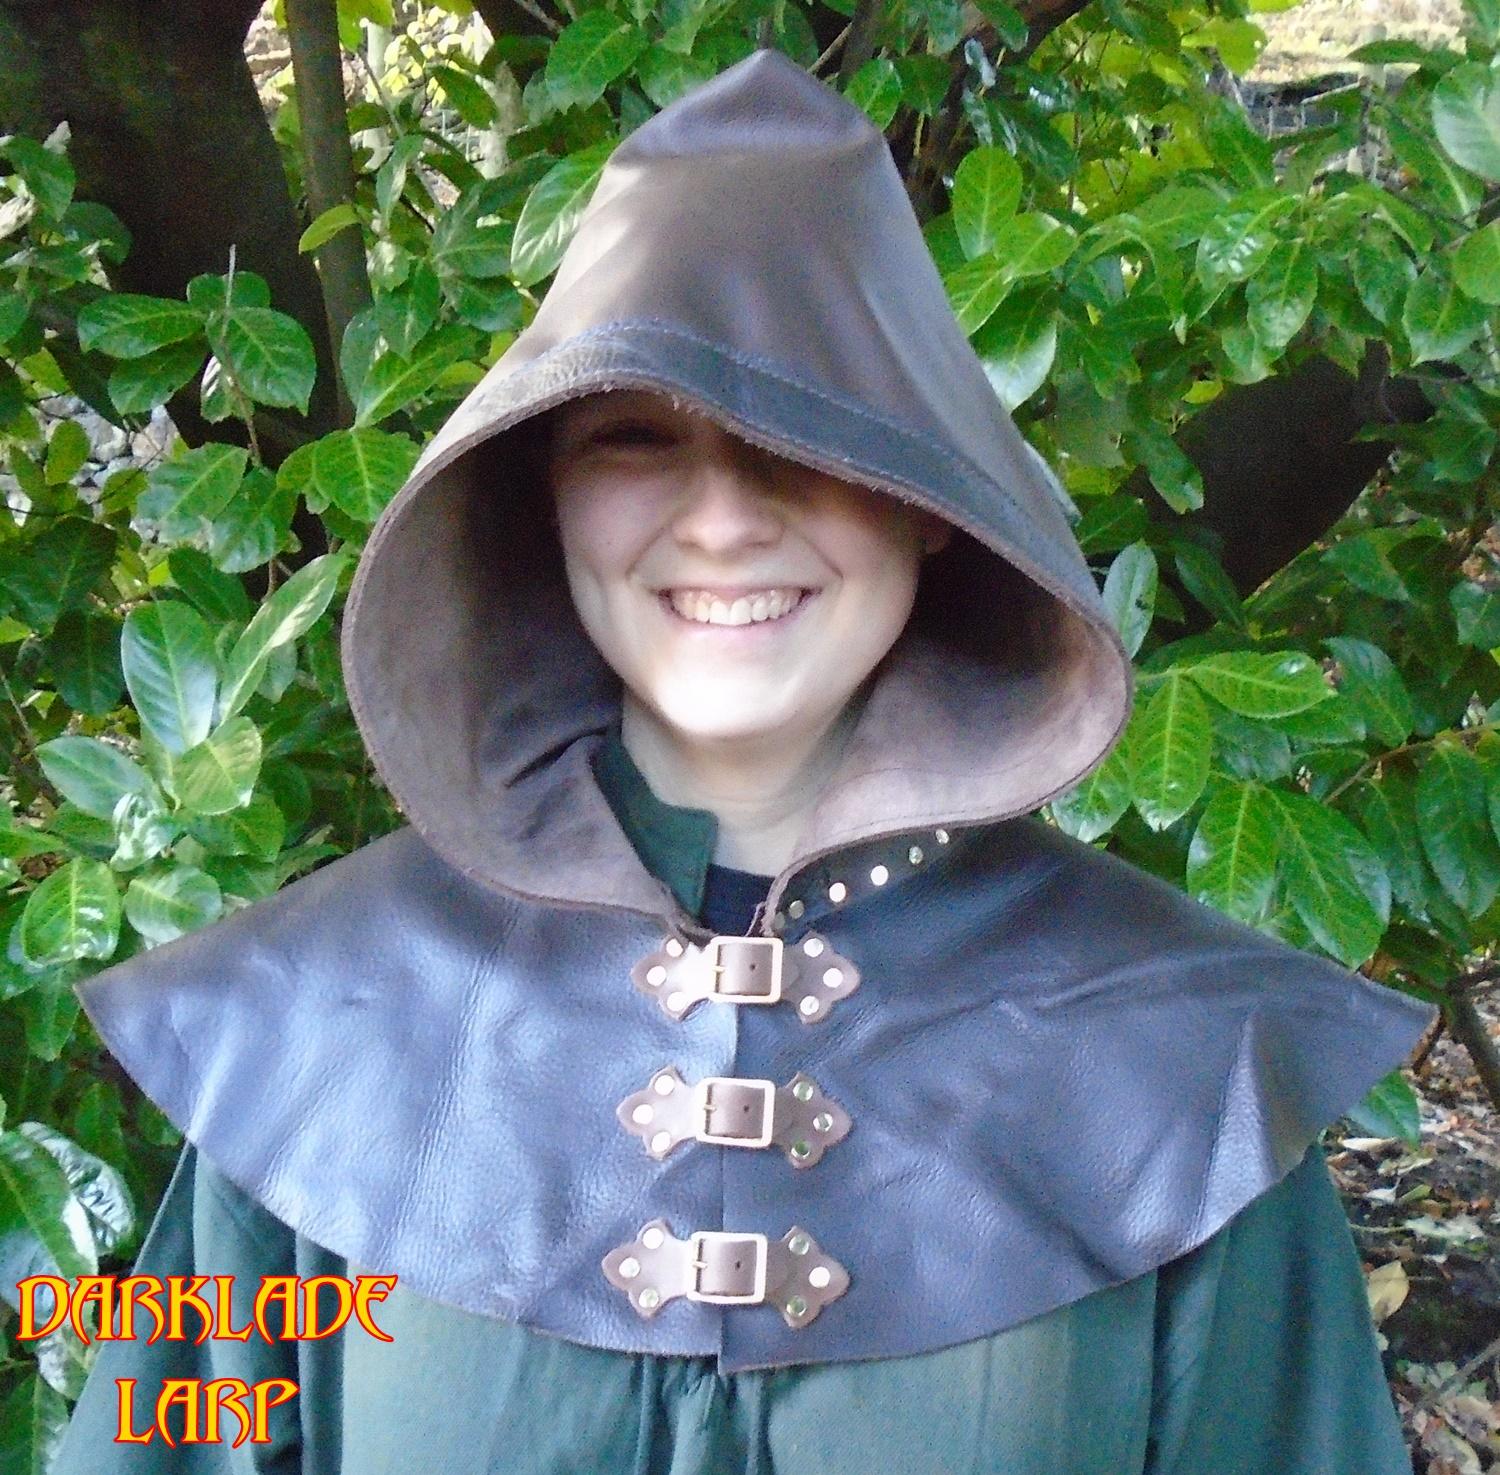 Brown leather hood with buckles at the front